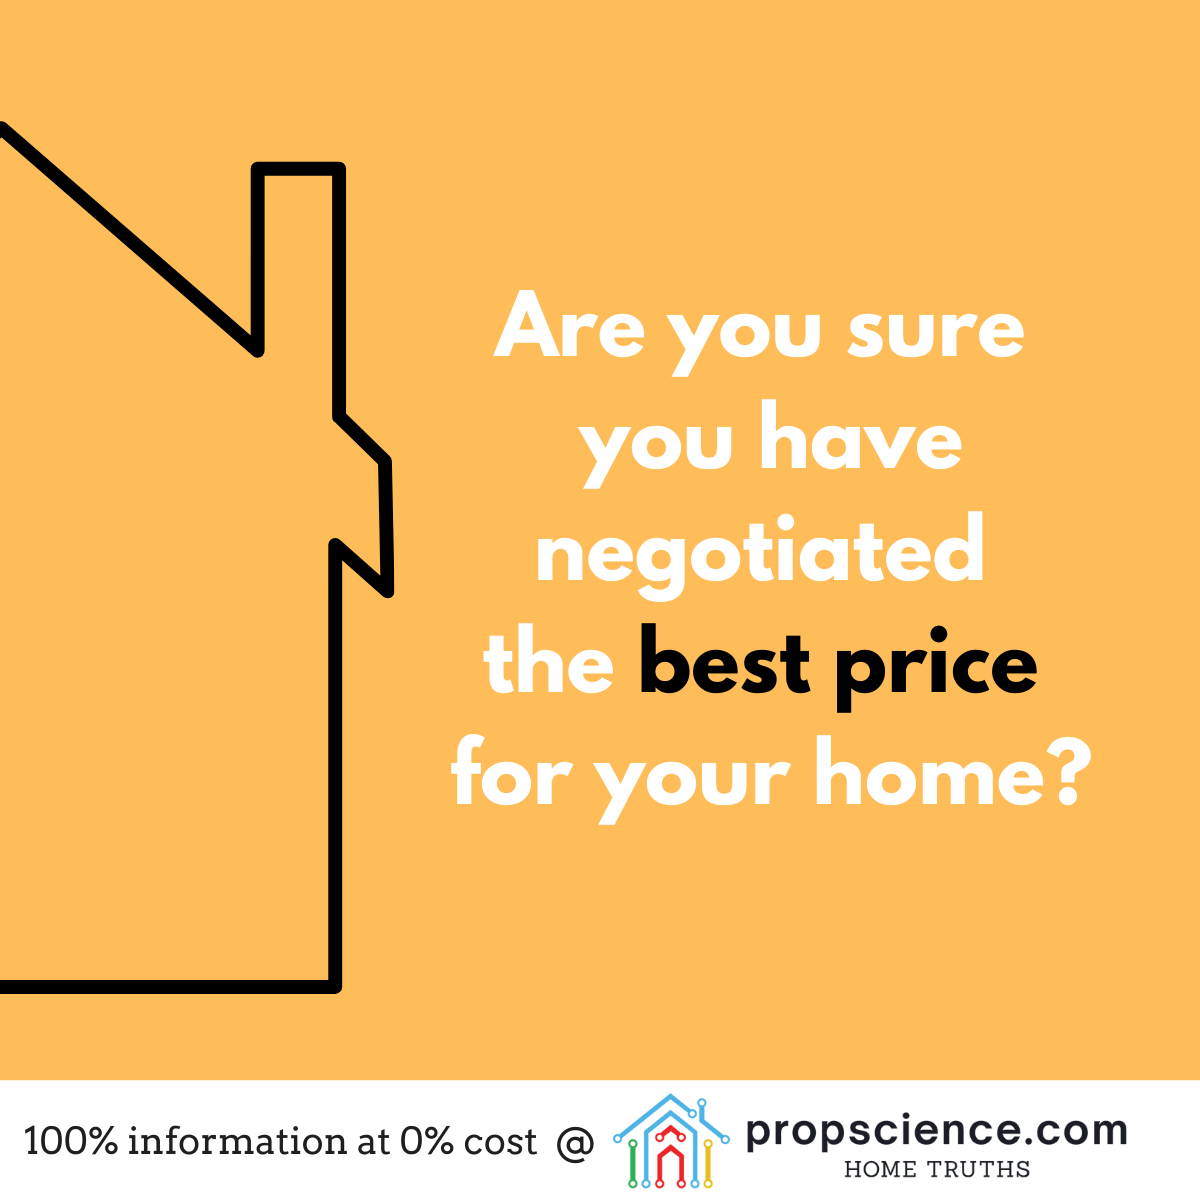 Have you negotiated the best price for your home?